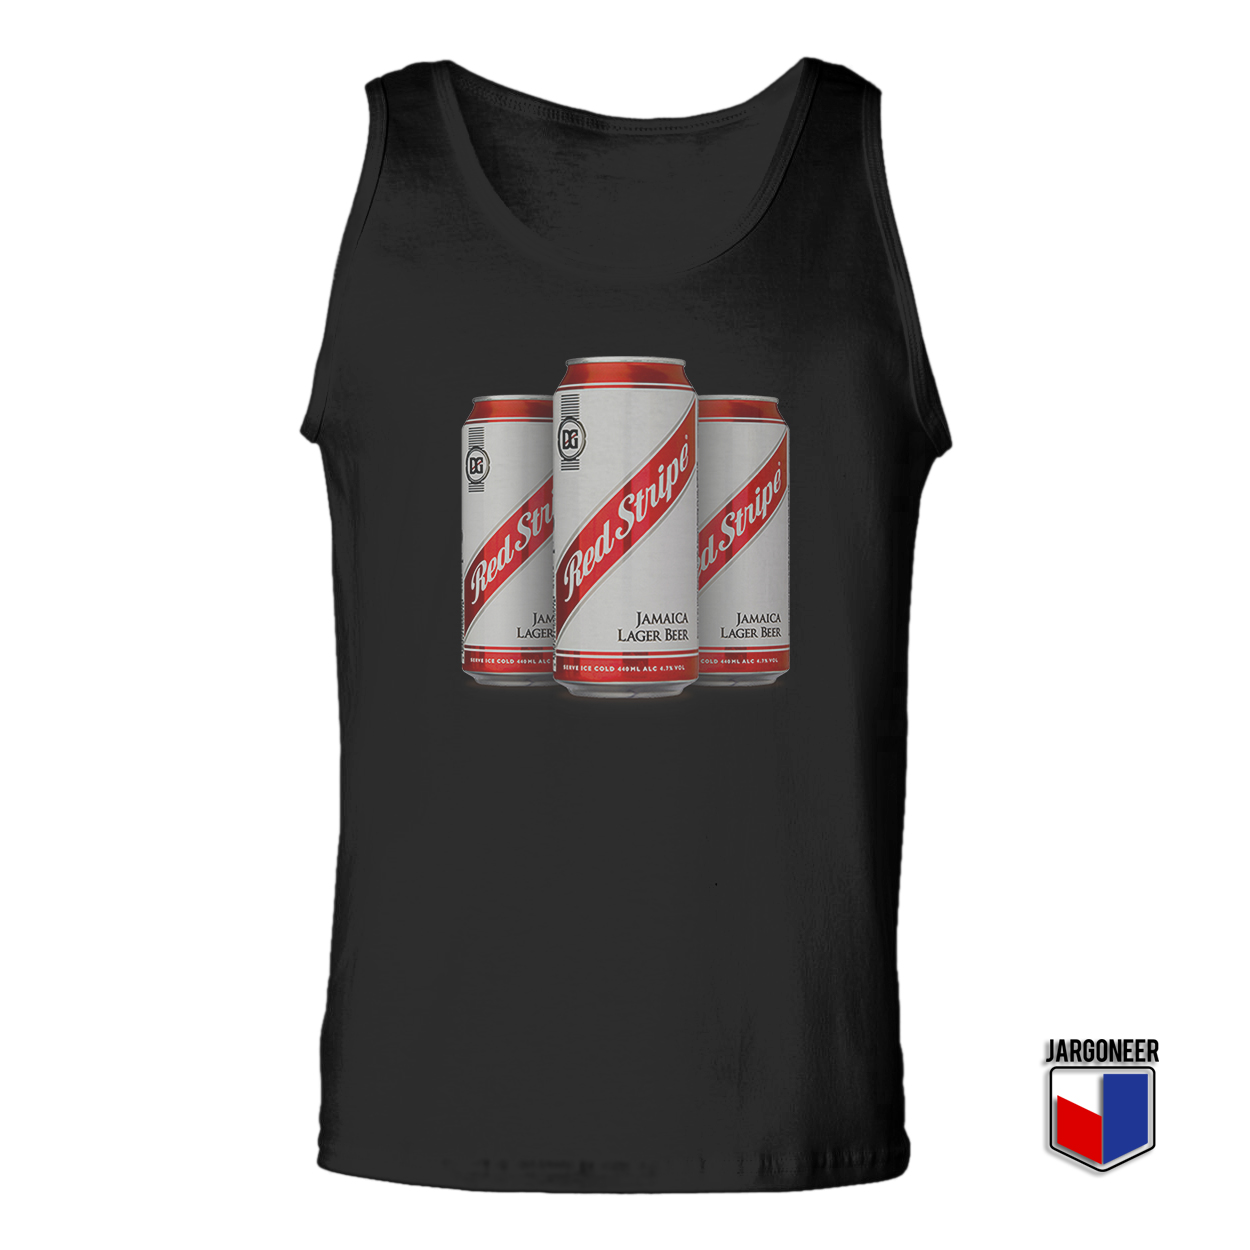 Red Stripe Three Lager Cans Black Tank Top - Shop Unique Graphic Cool Shirt Designs